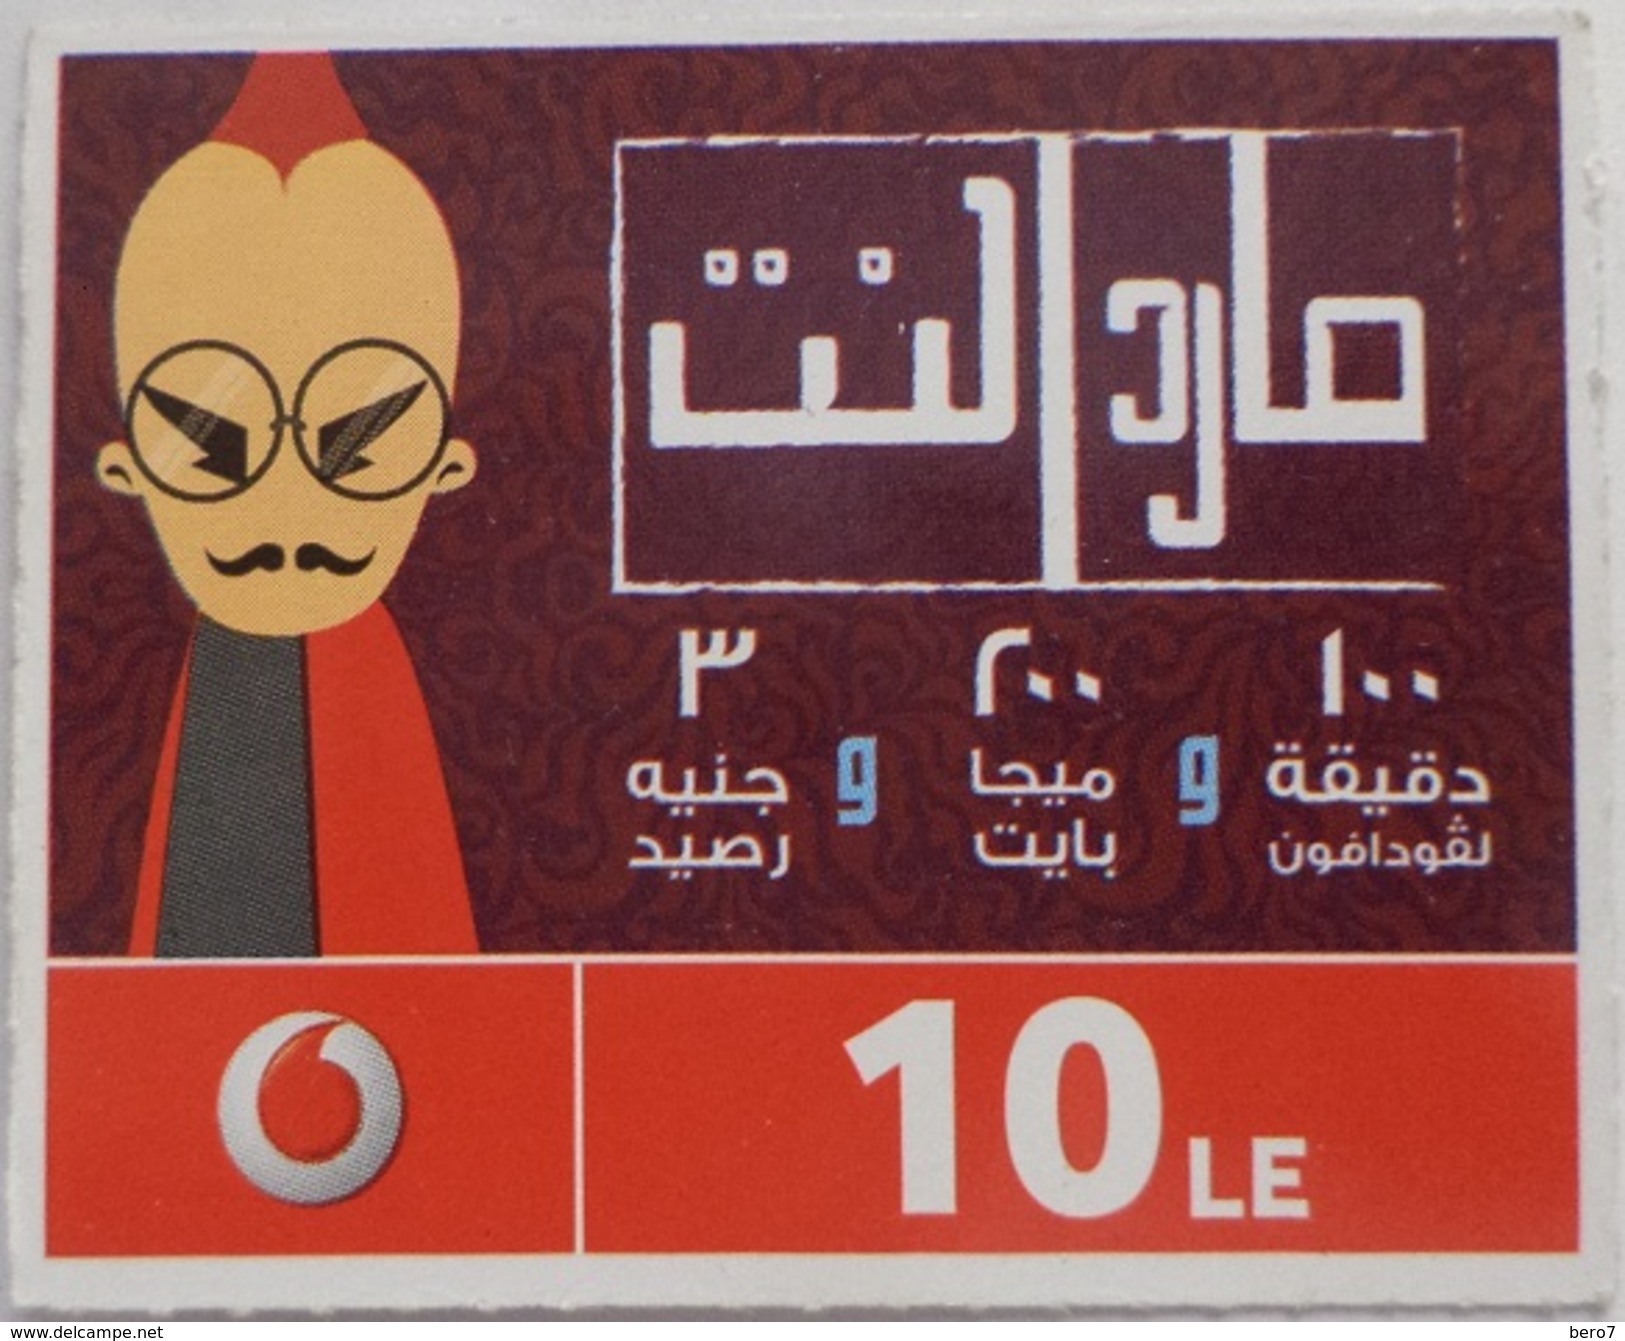 2 Consecutive Numbers (Vodafone  Mared Medium Size Phone Cards) (Egypt) - Egypt